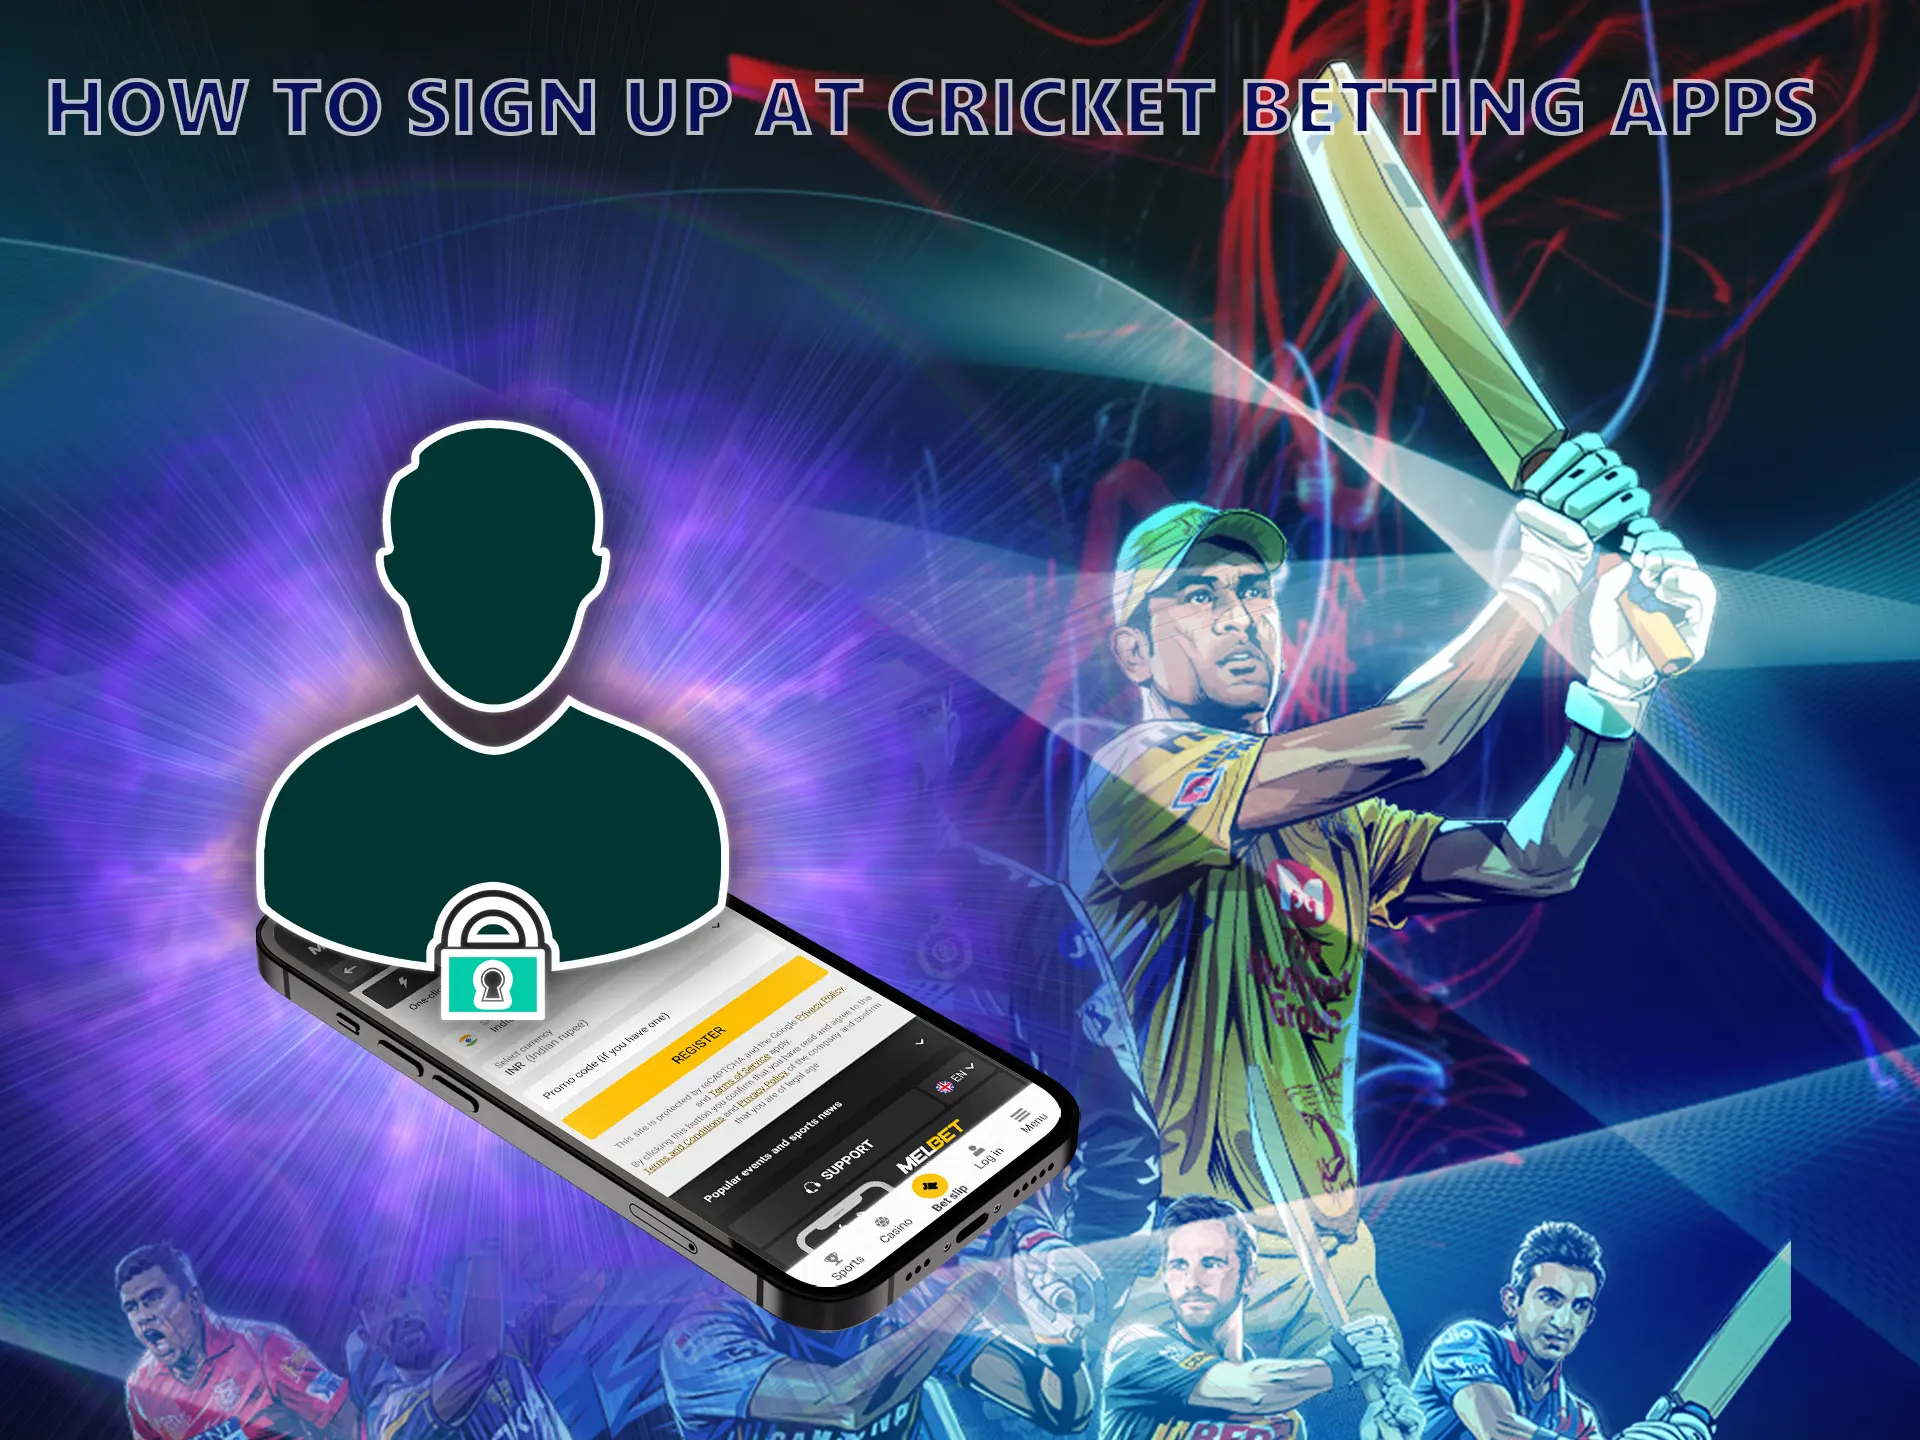 After installing on your smartphone, you must go through the process of creating an account, it is necessary to start betting on cricket.